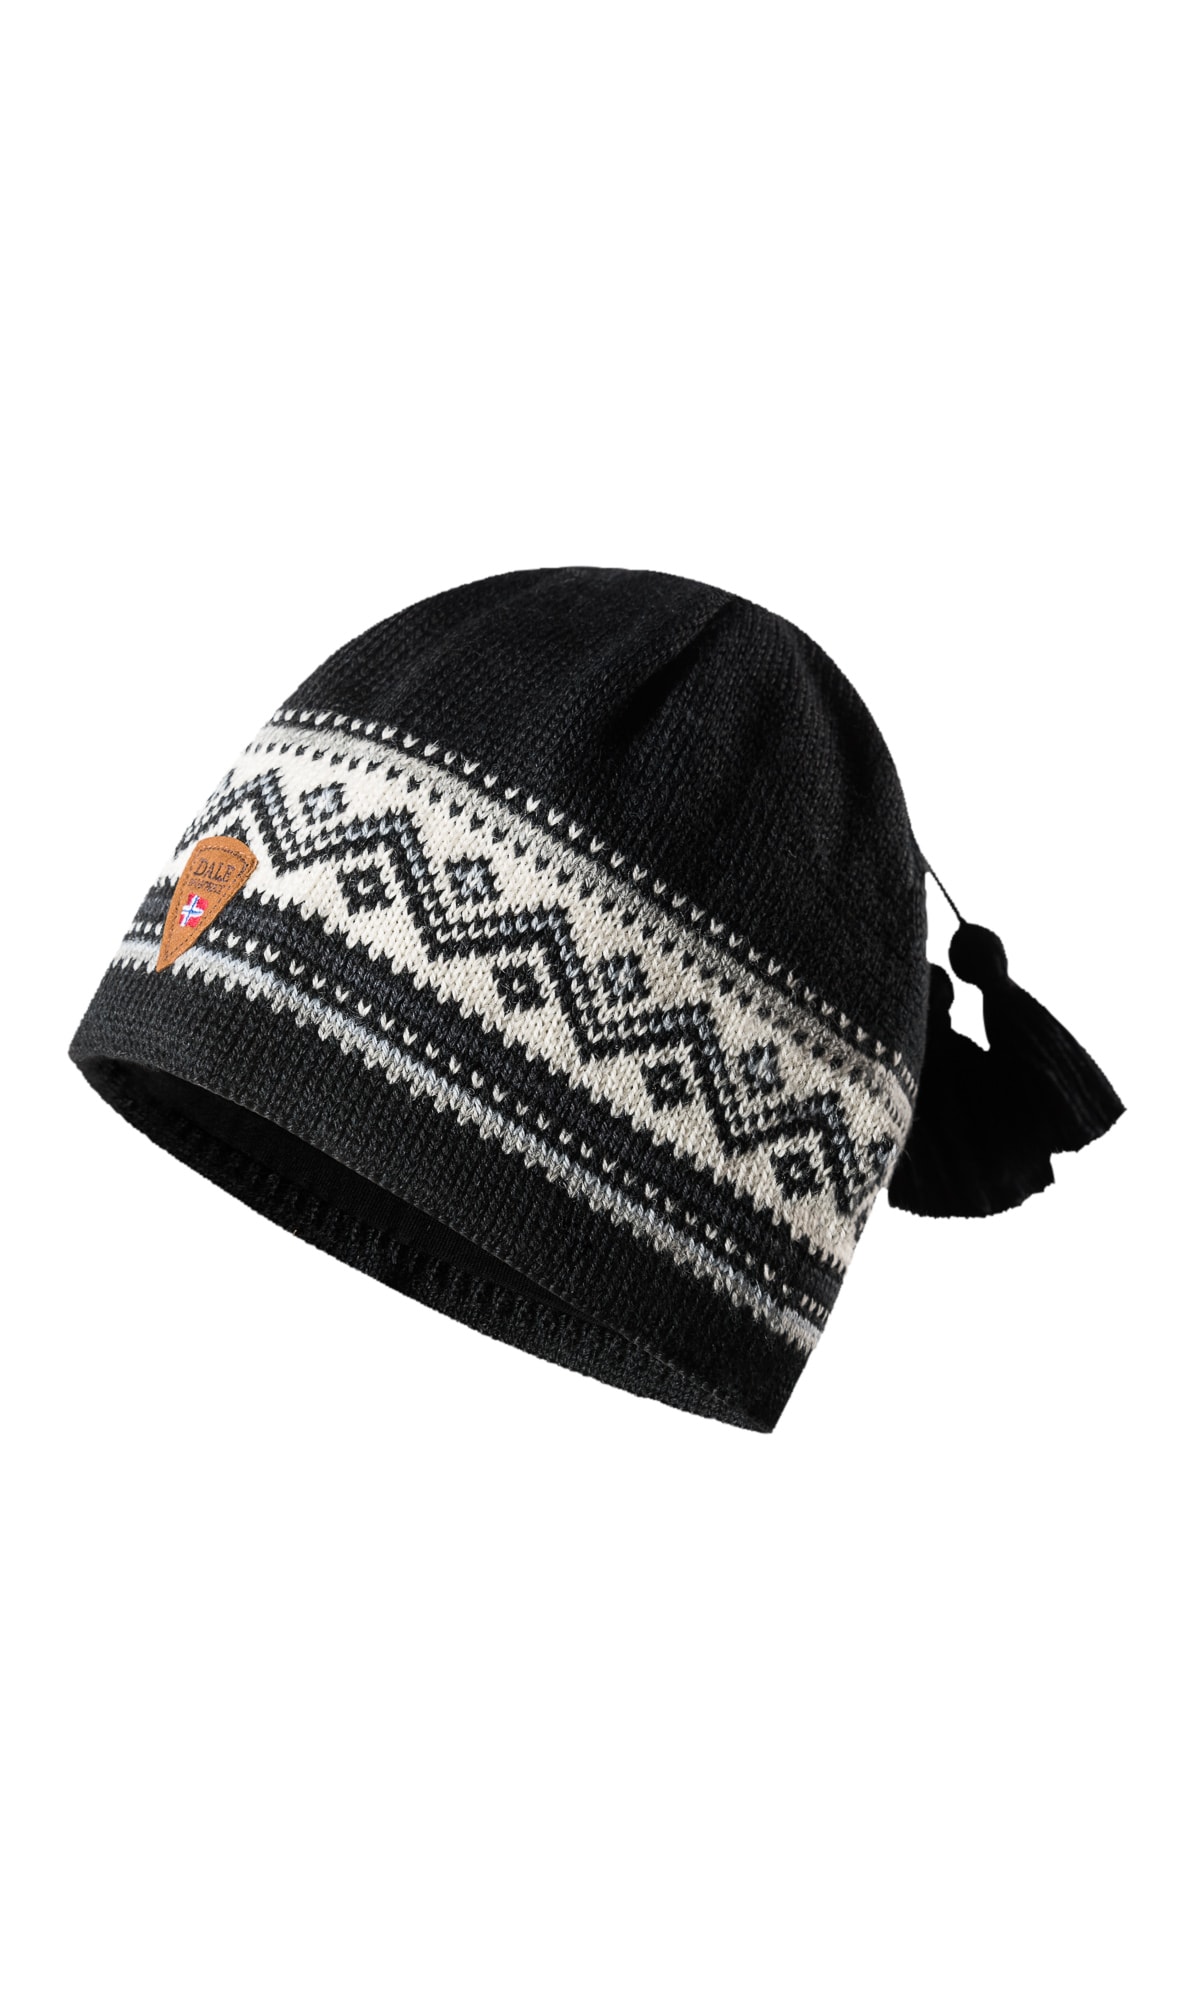 Vail Hat - Unisex - Black/White - Dale of Norway - Dale of Norway